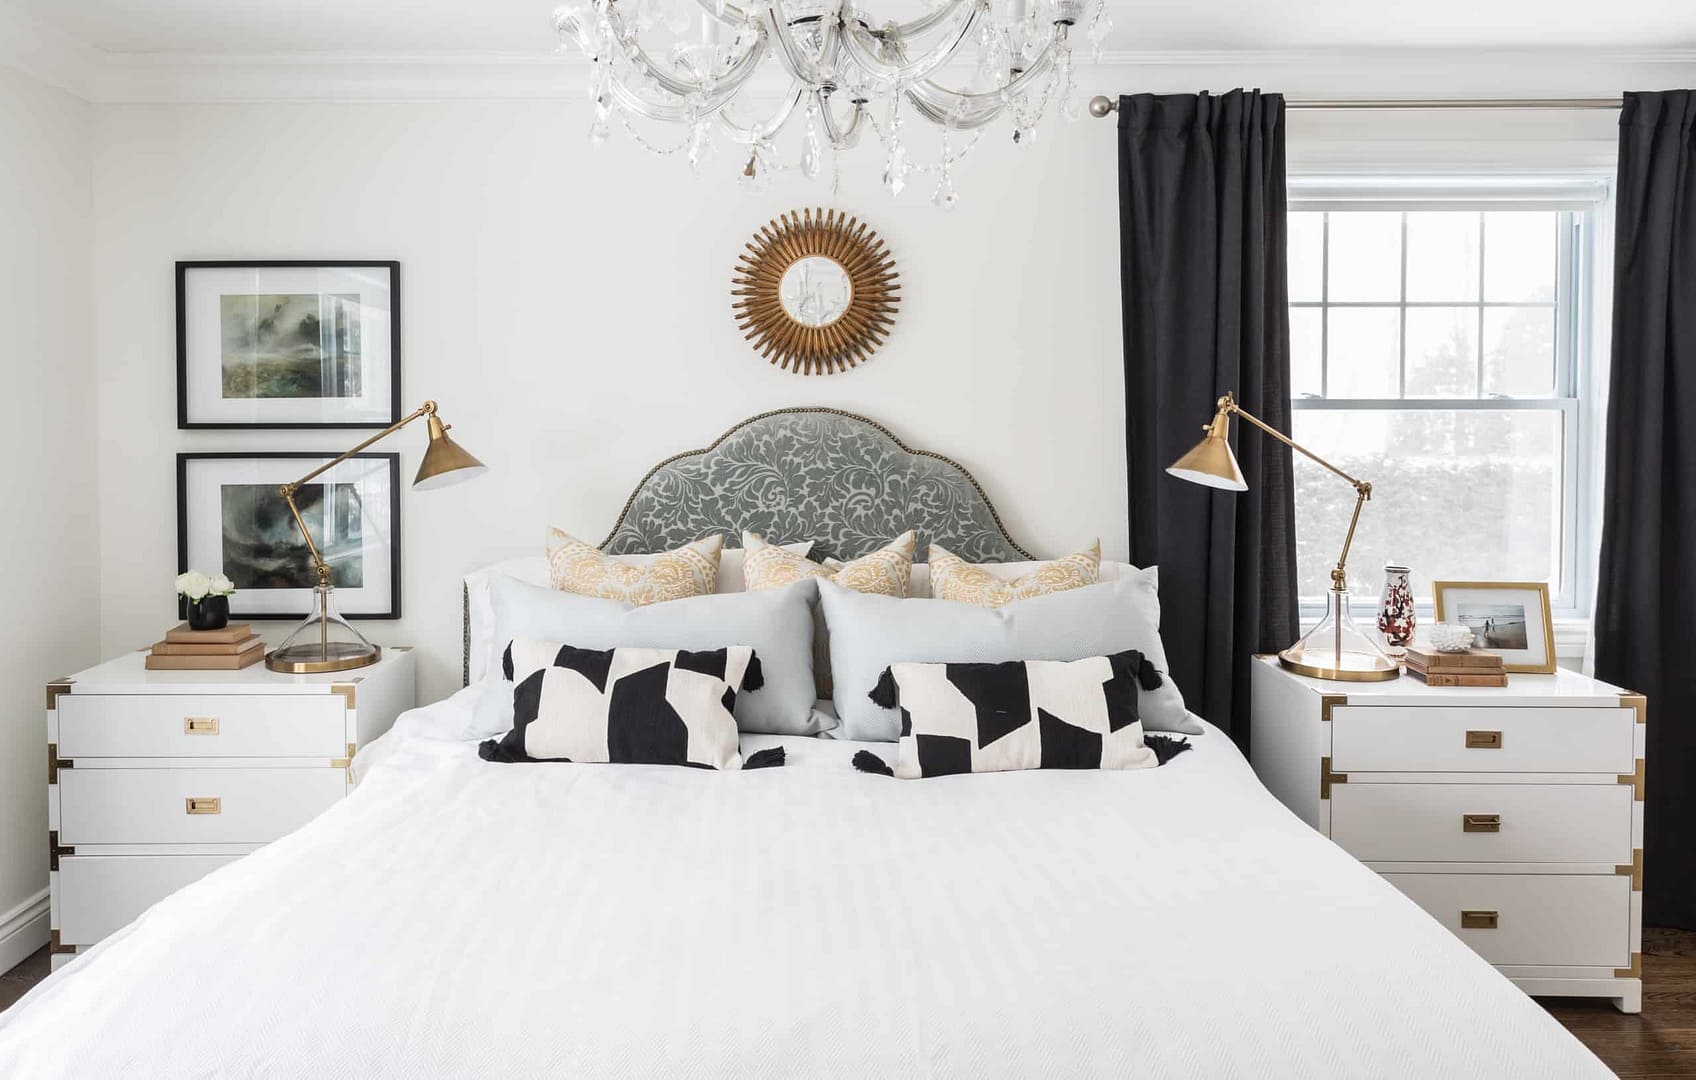 Fancy white chandelier over the bed inside the master bedroom